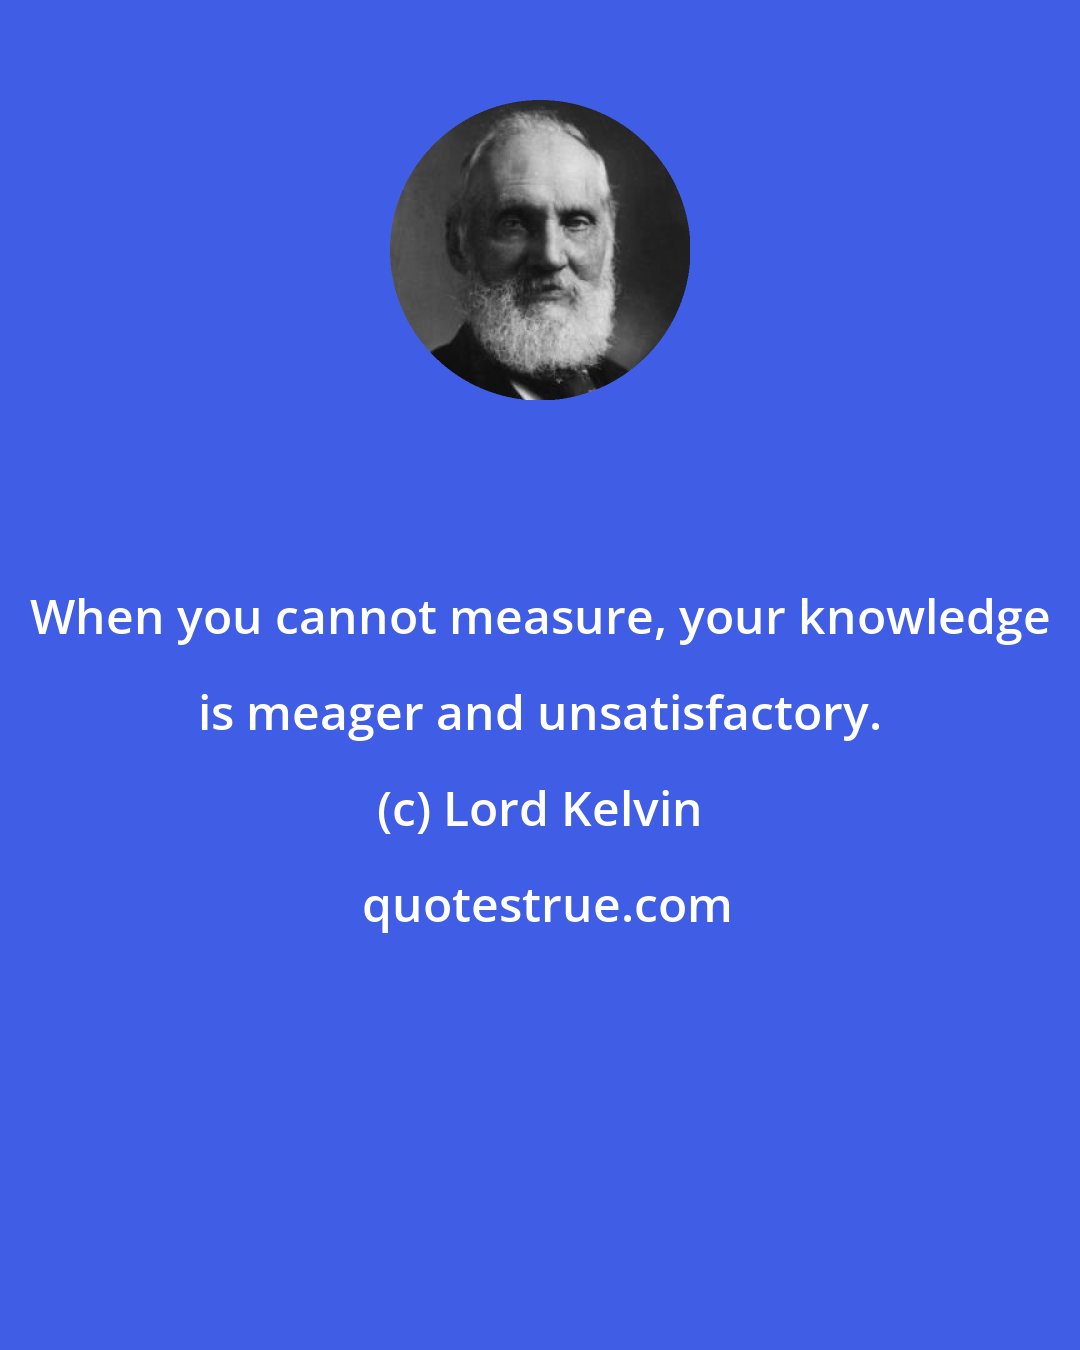 Lord Kelvin: When you cannot measure, your knowledge is meager and unsatisfactory.